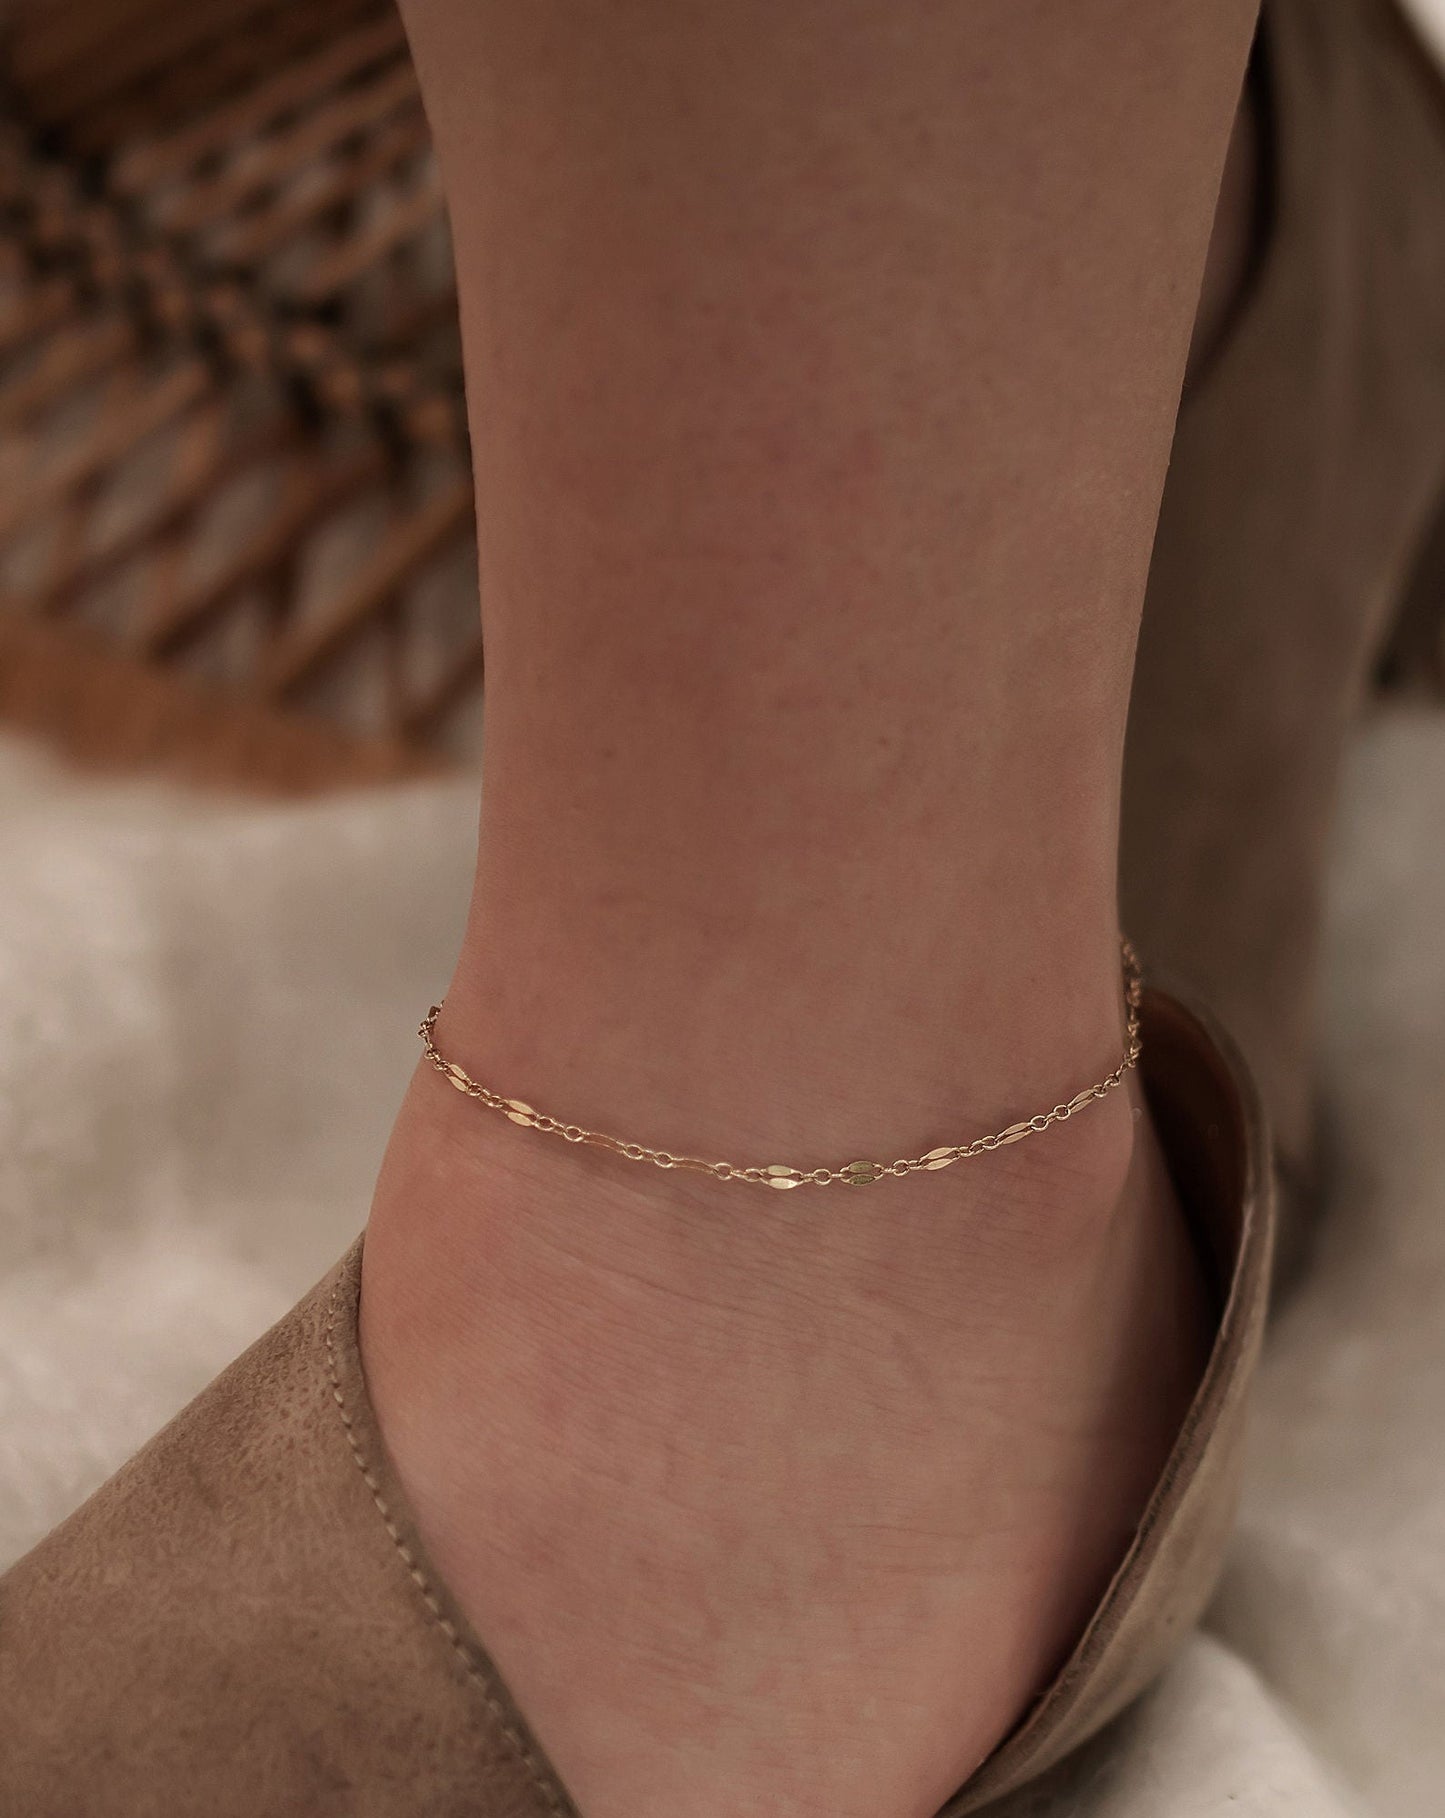 Chantilly Lace Anklet